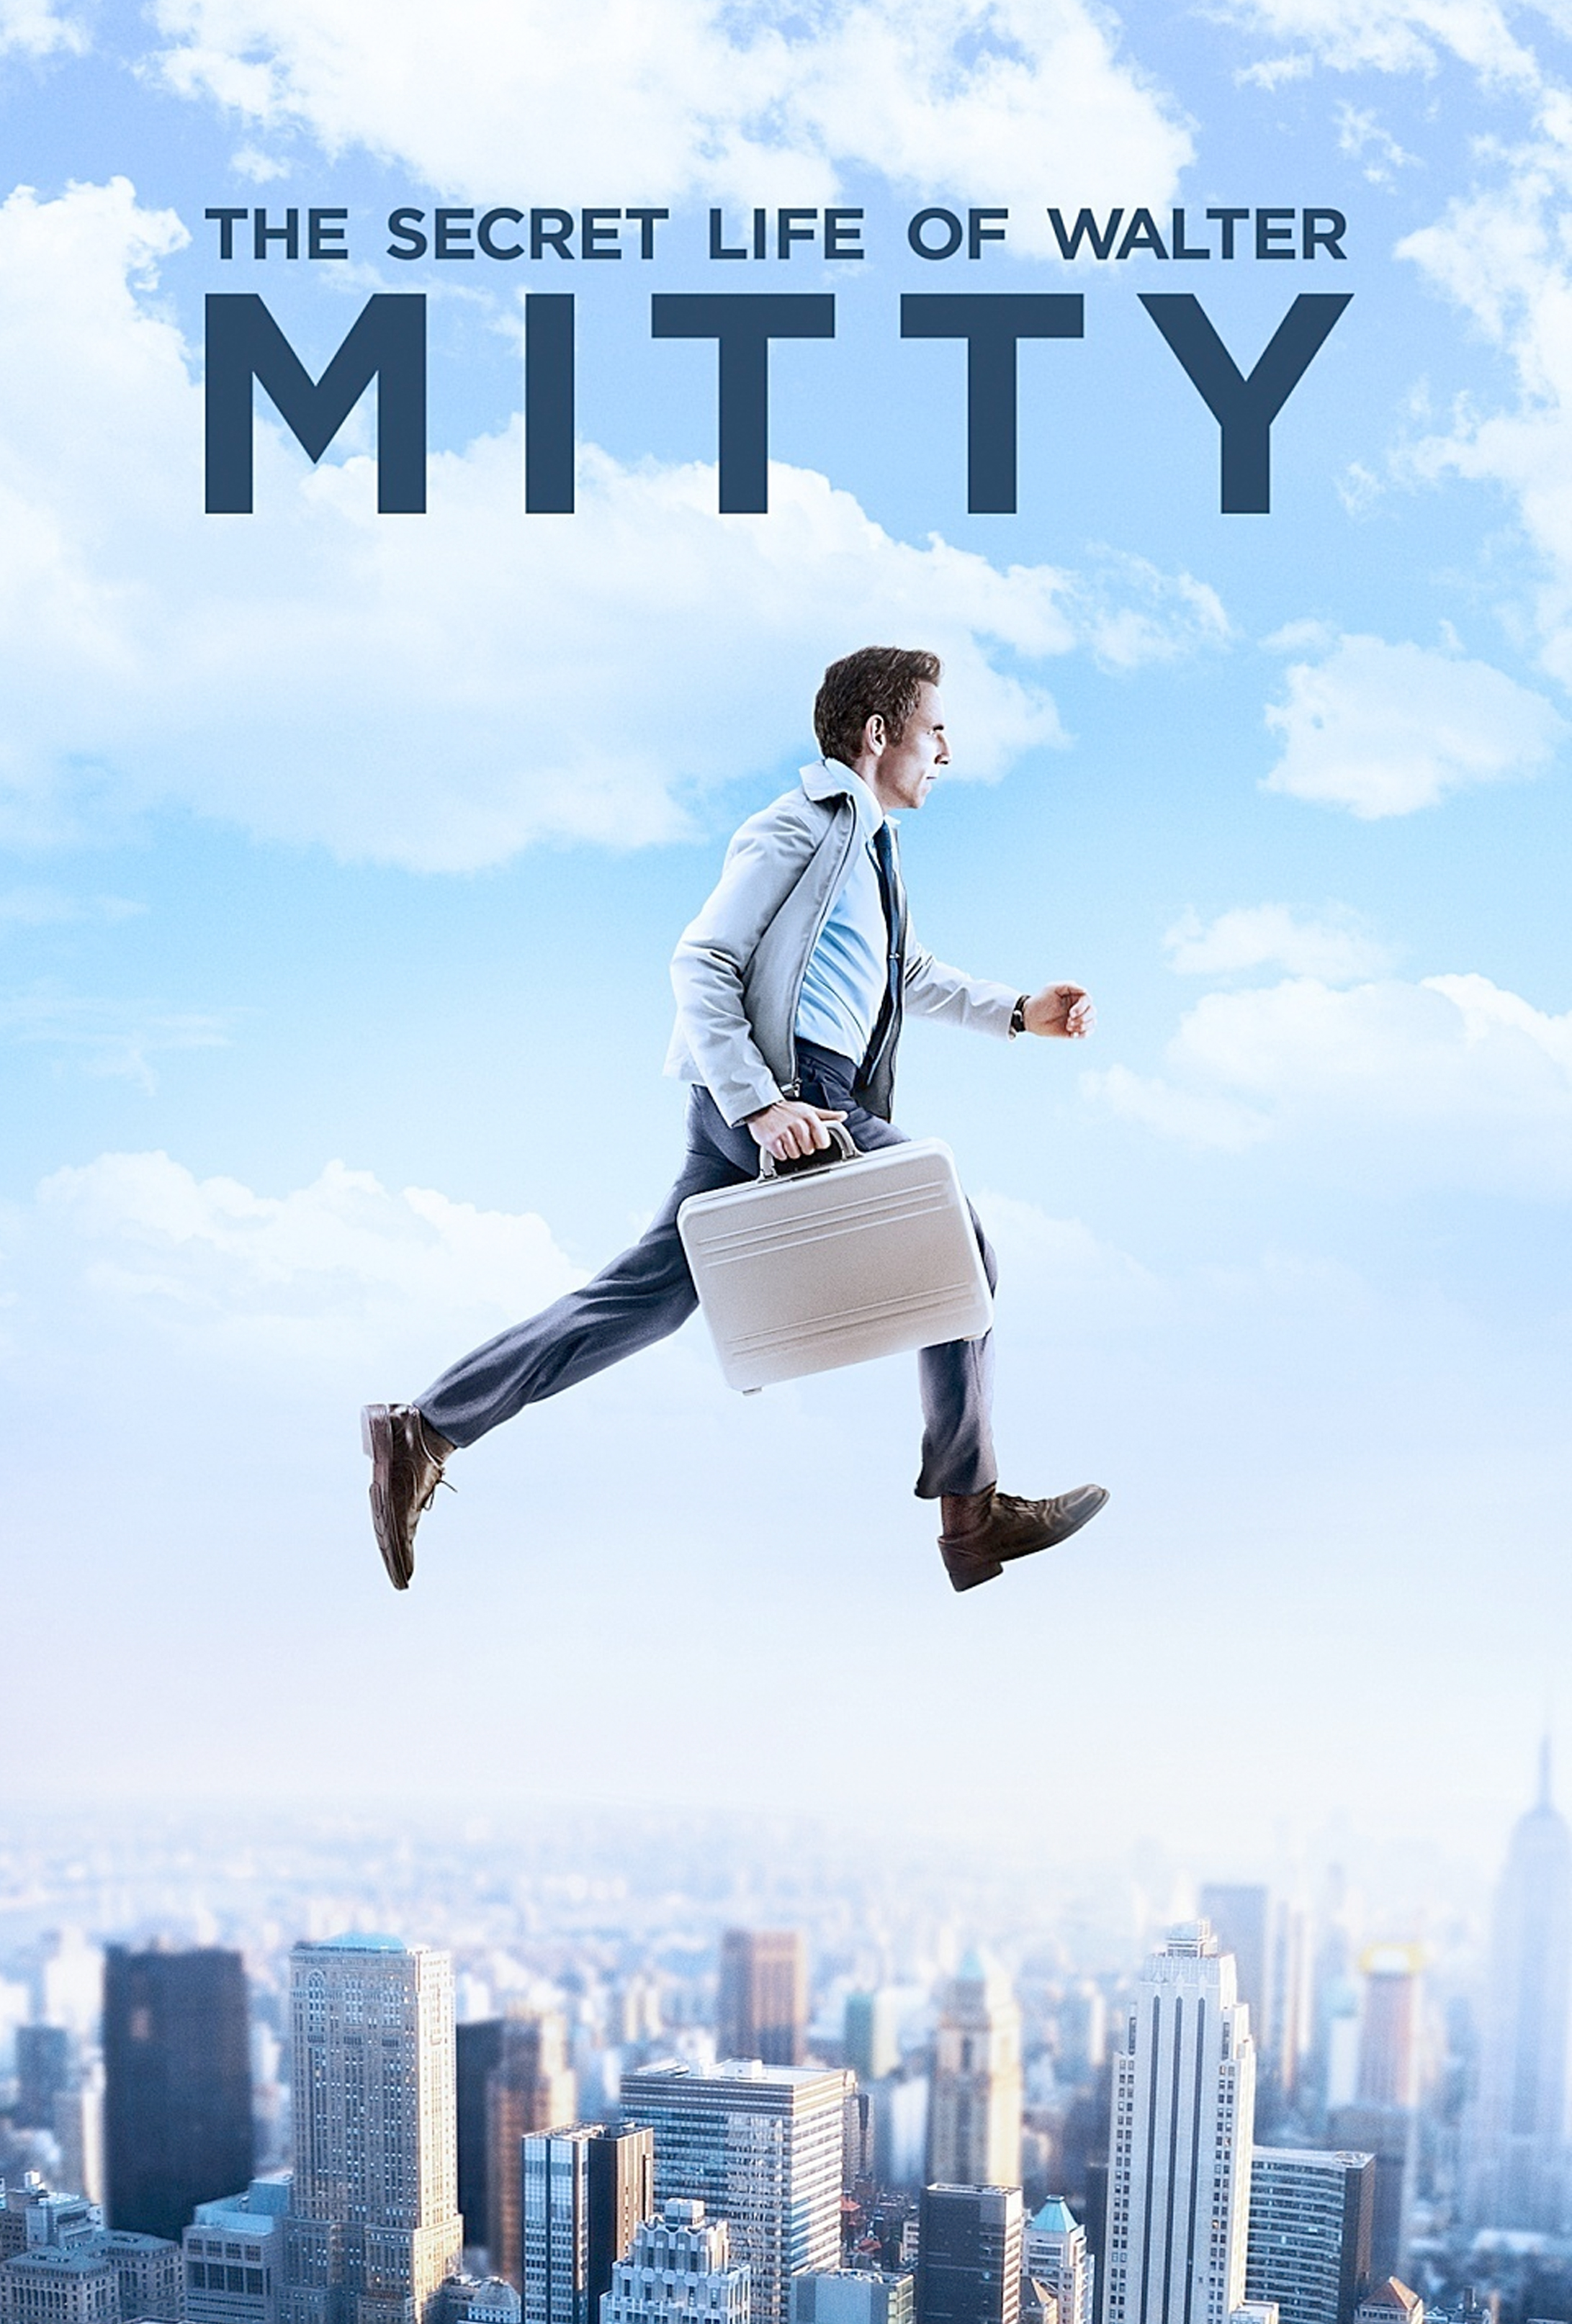 The Secret Life of Walter Mitty film poster